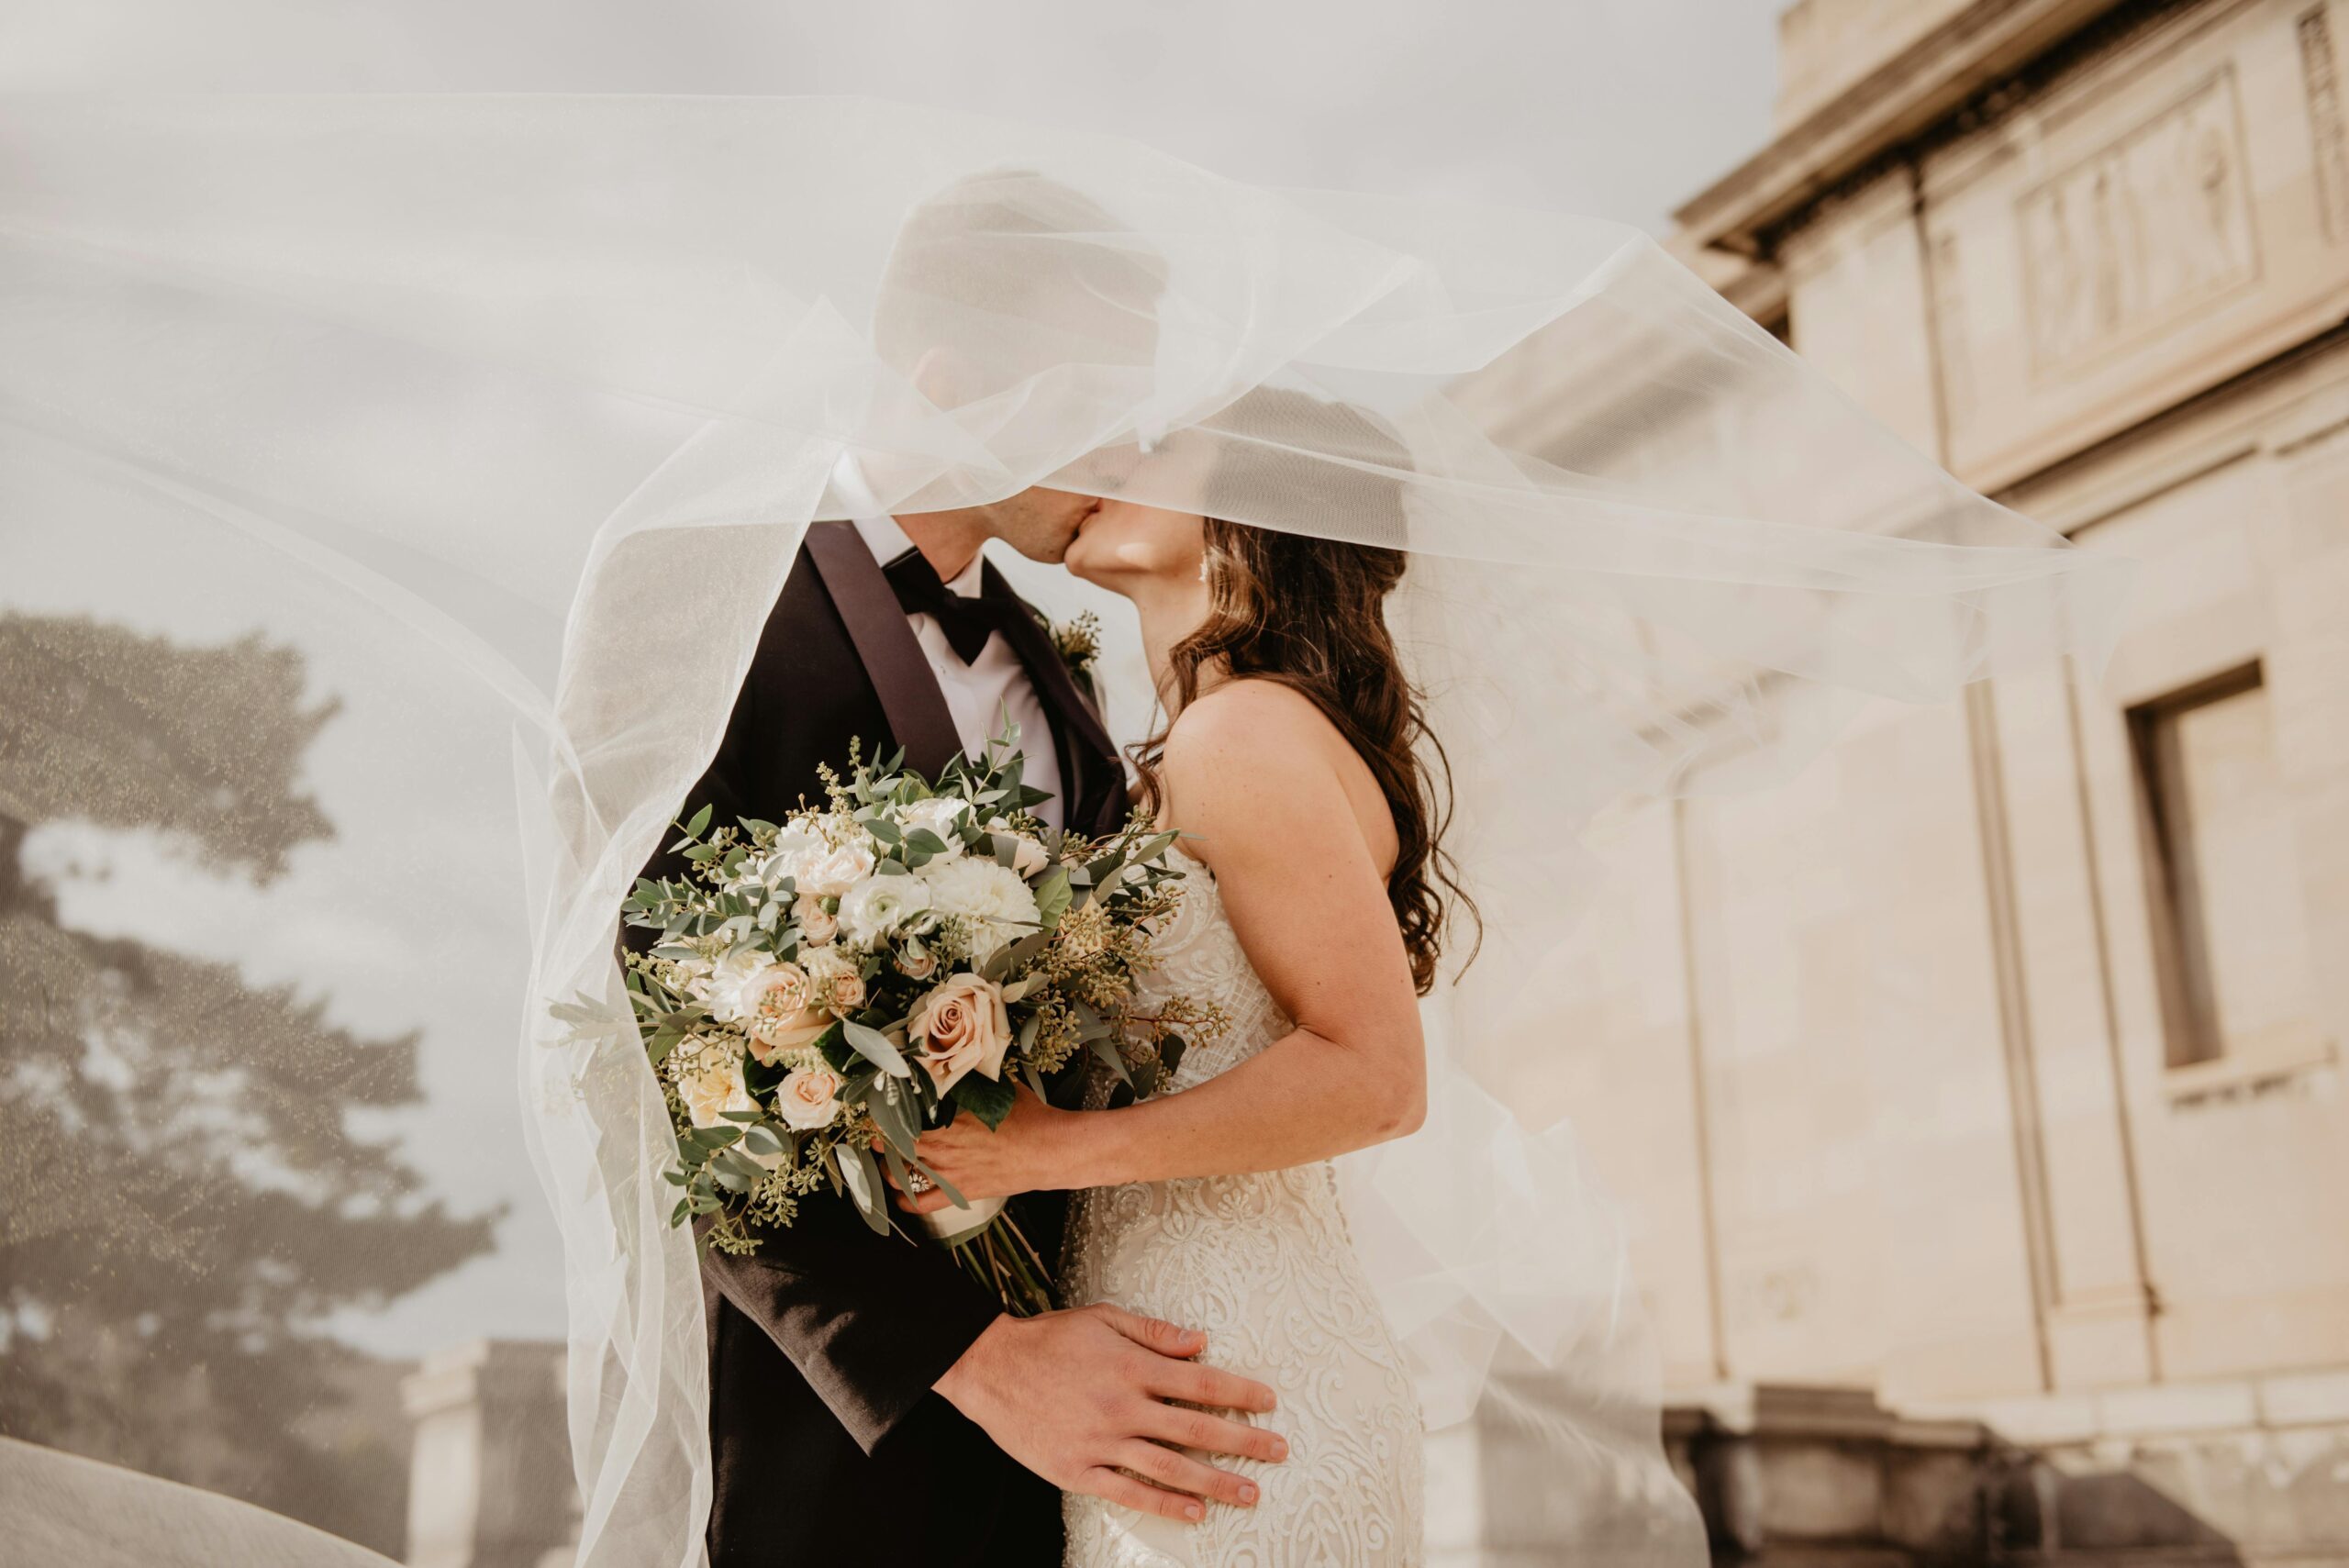 The Destination Wedding in Italy